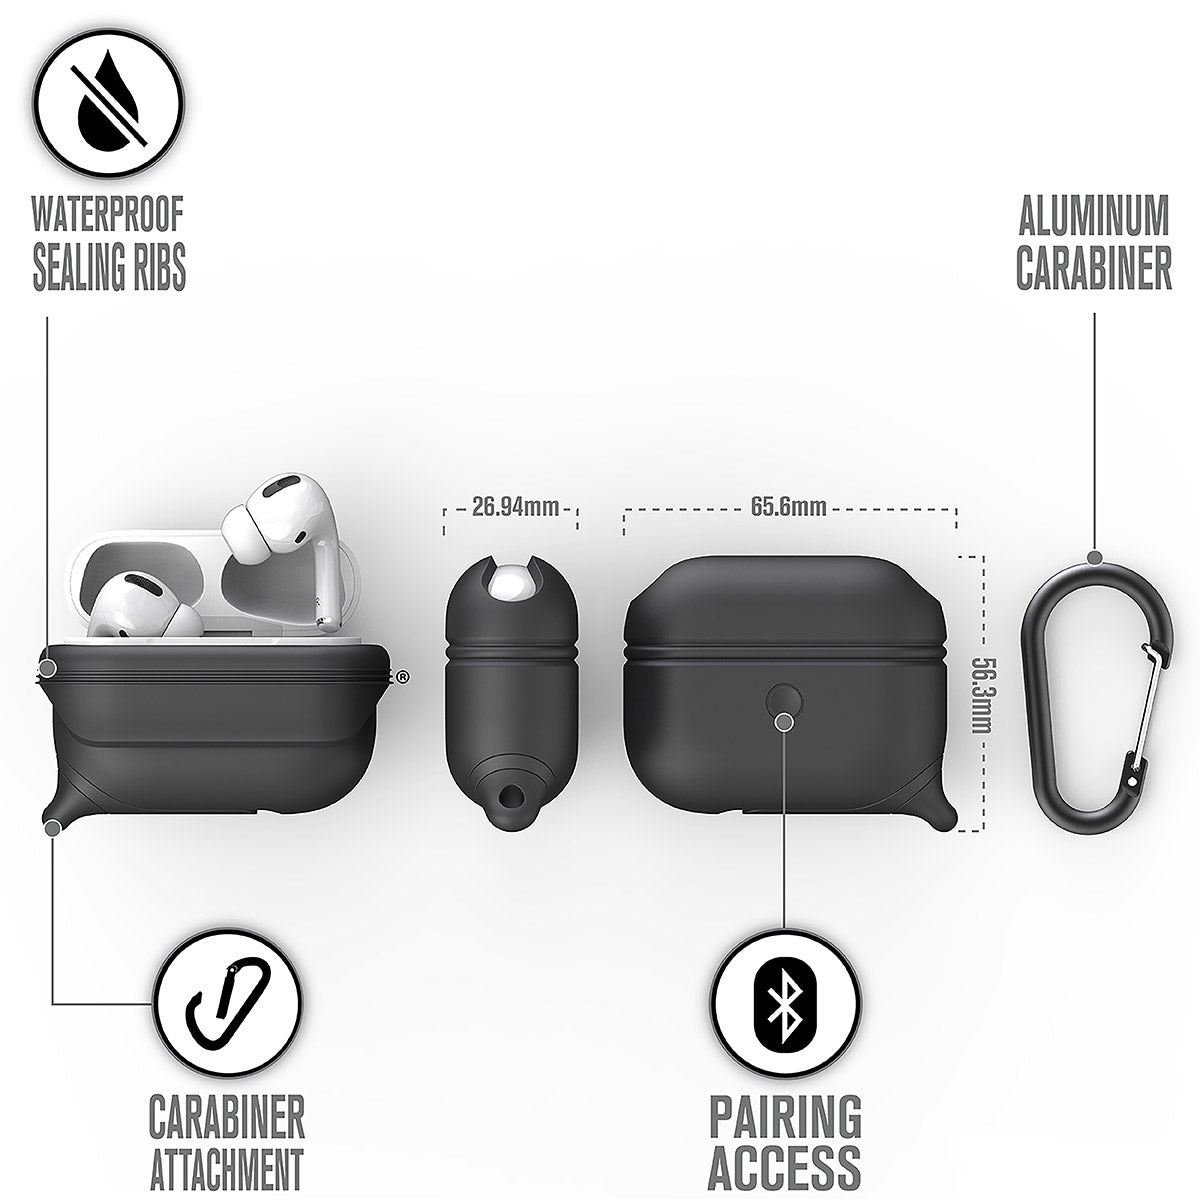 catalyst airpods pro gen 2 1 waterproof case carabiner special edition black different views showing the sealing ribs carabiner attachment loop and pairing access text reads waterproof sealing ribs aluminum carabiner carabiner attachment pairing access